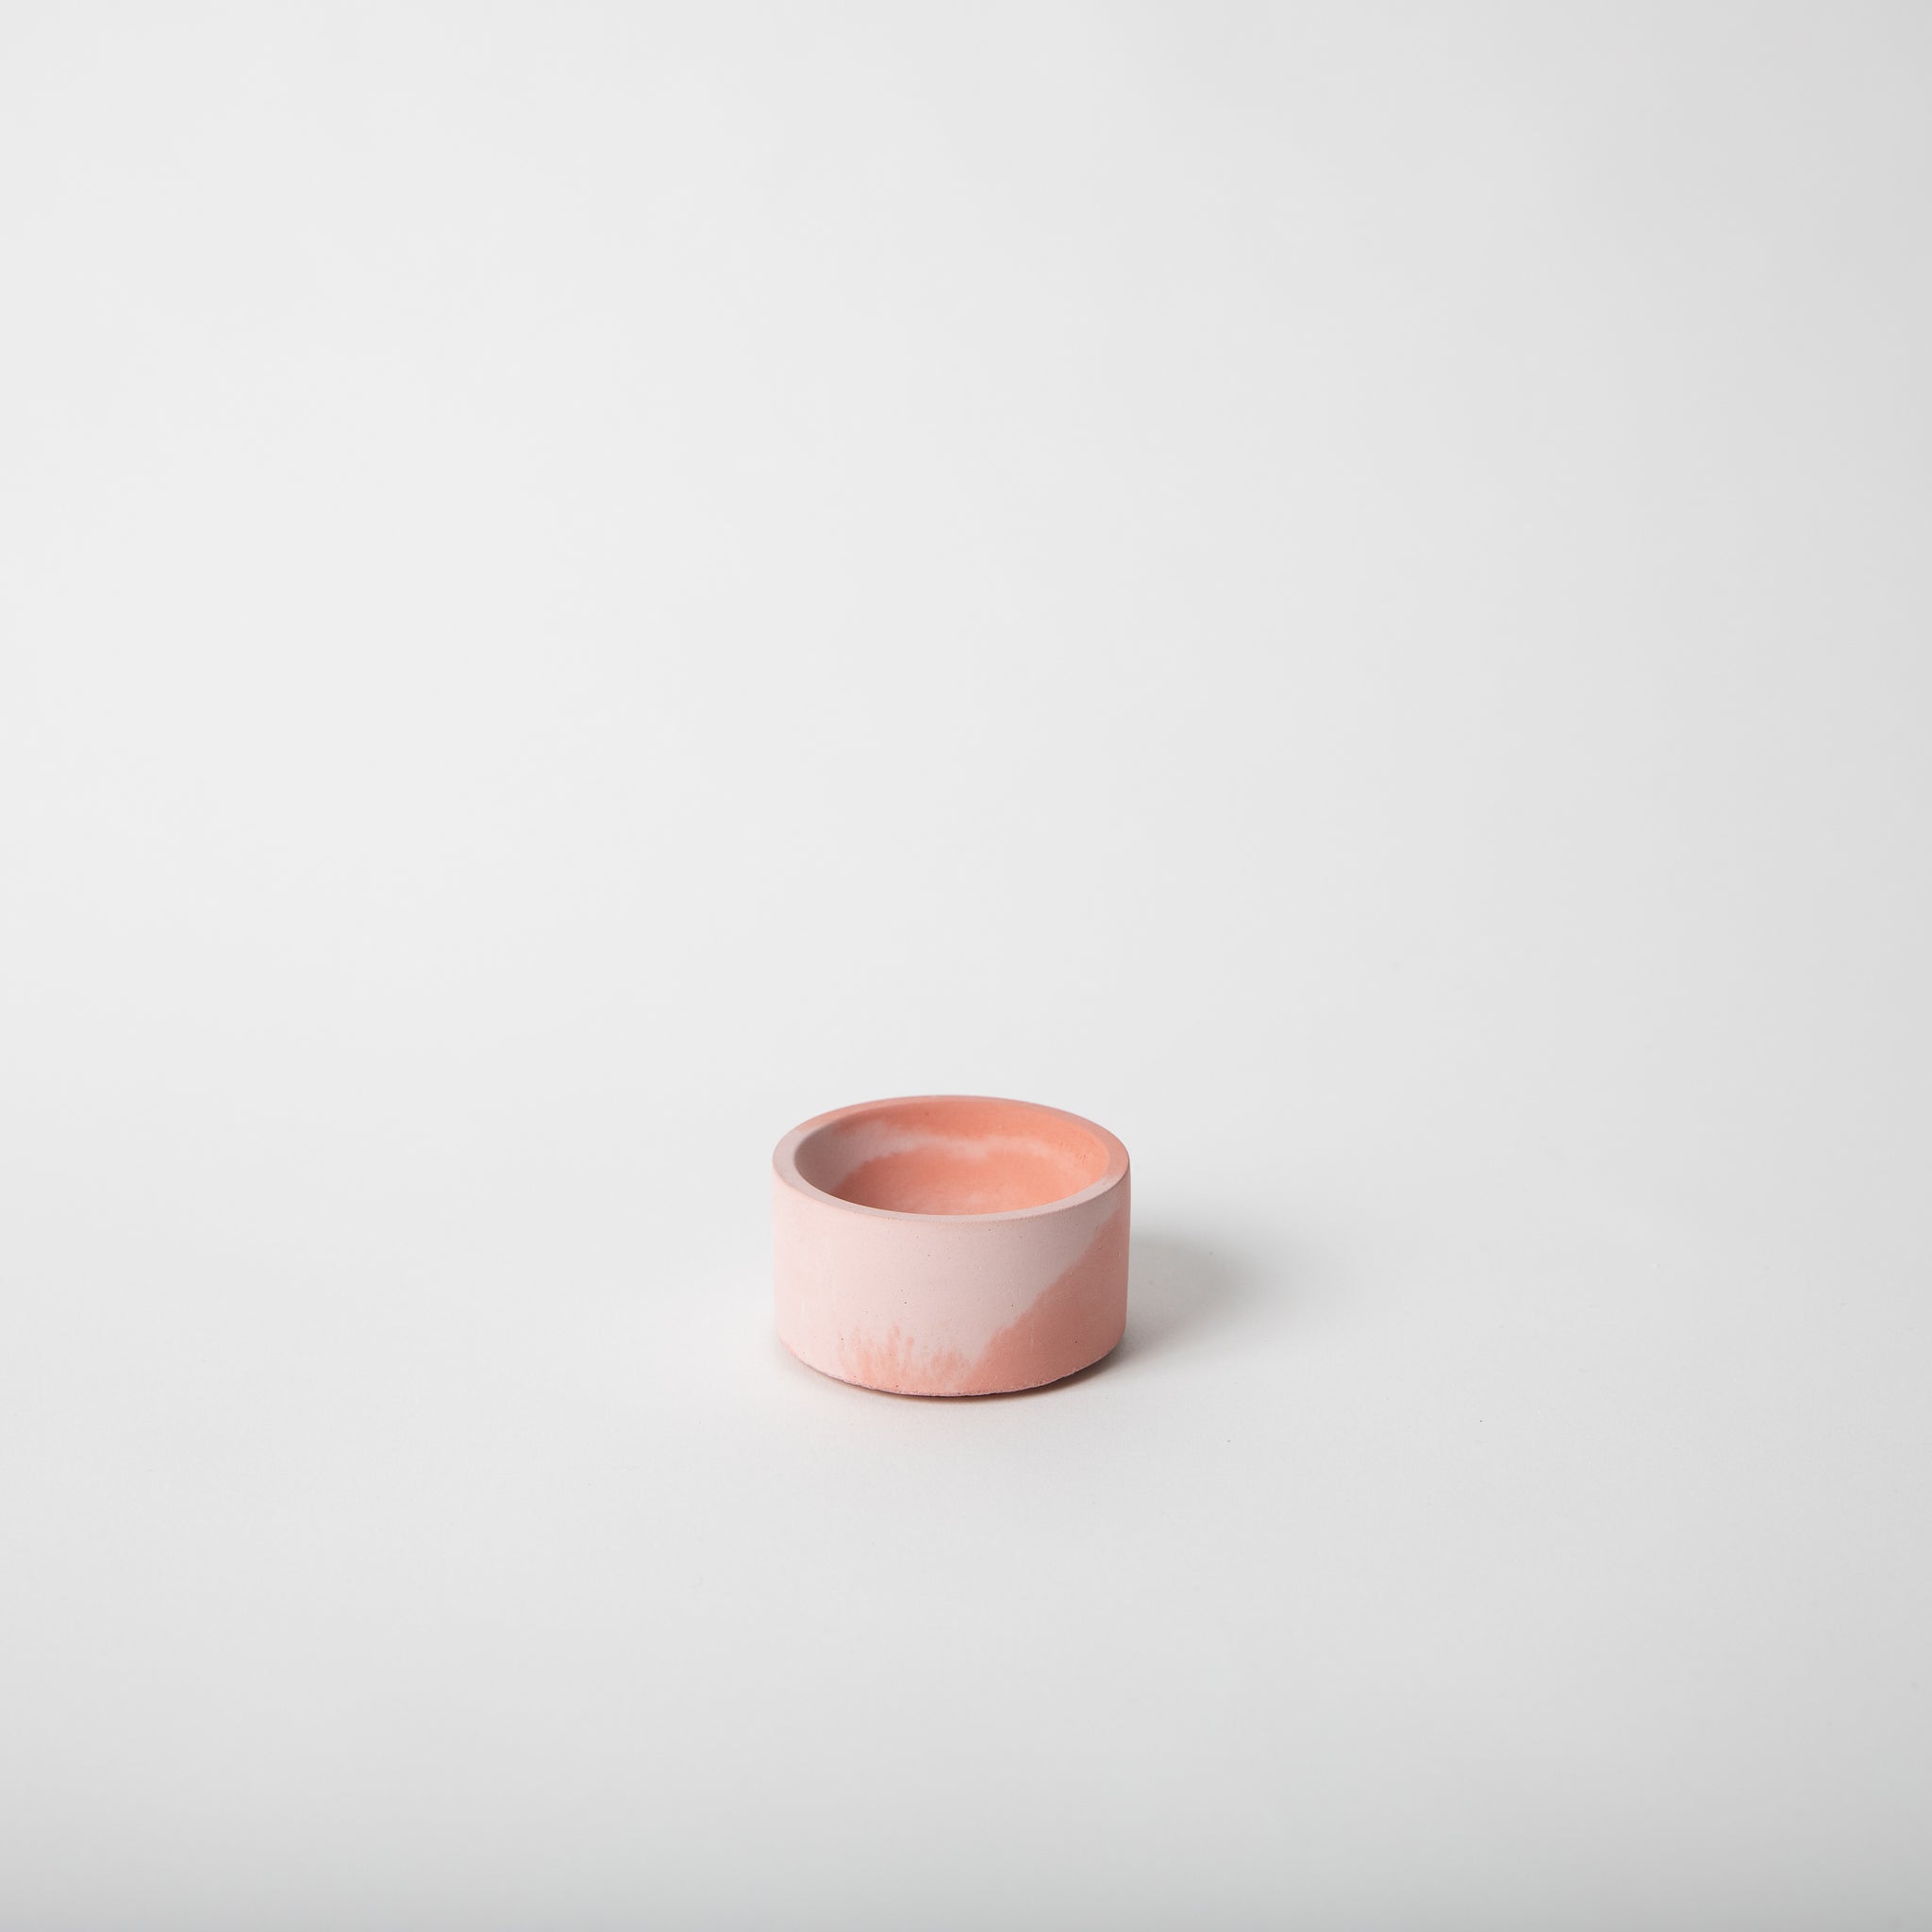 Pretti.Cool Incense Holder - Round - Marbled Pink & Coral